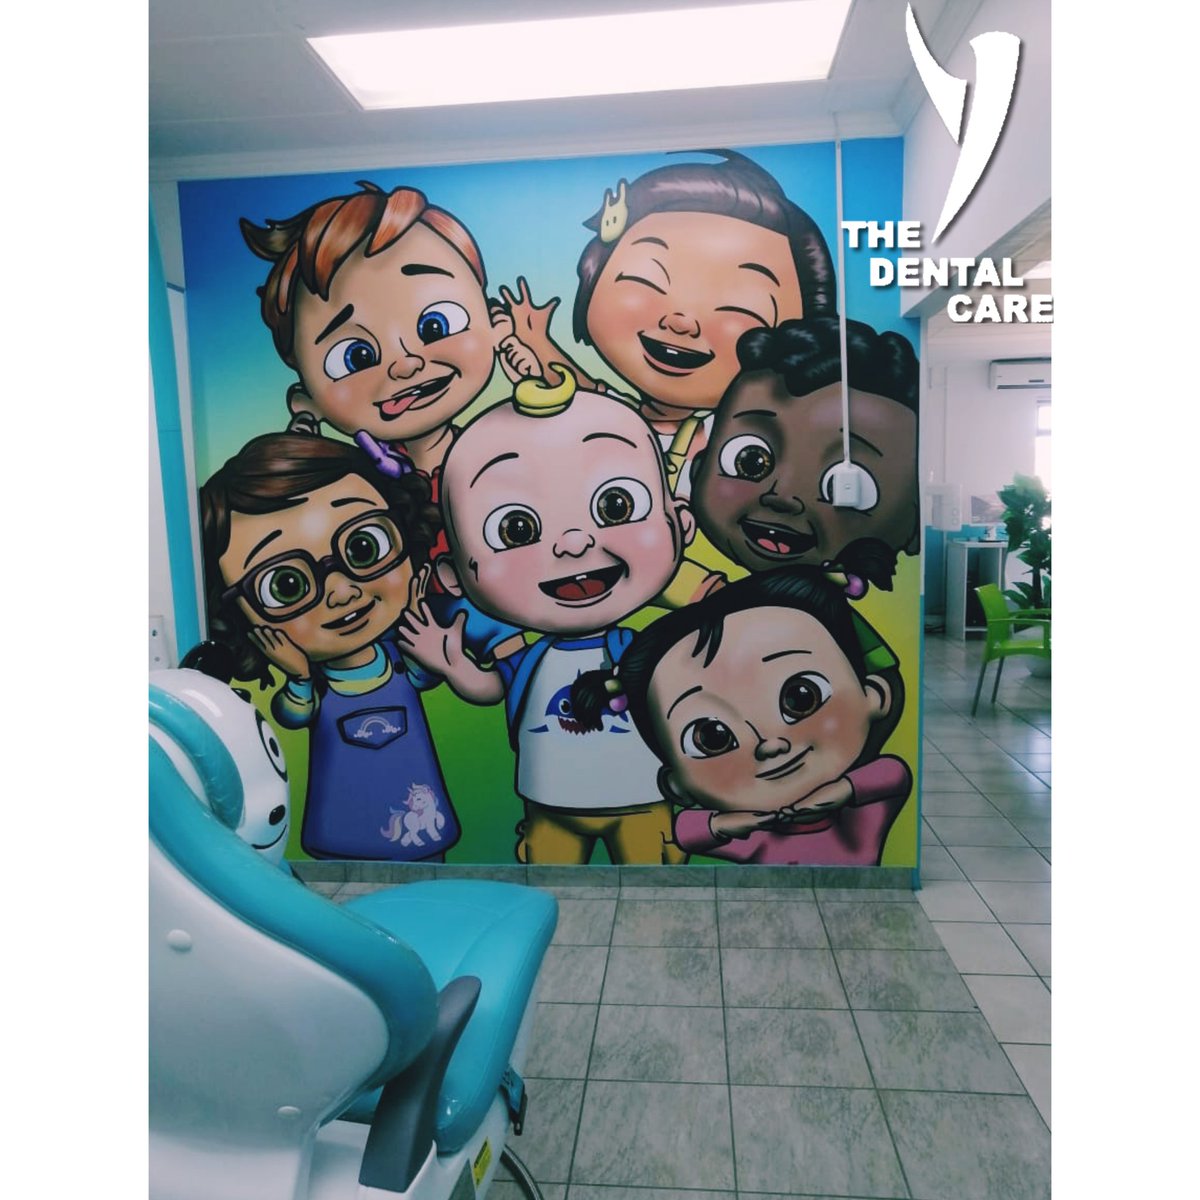 How about this tweet? --- 'Adding Coco Melon cartoons to our dental practice wall! 🎨 Fun and educational, they're a hit with our young patients, teaching them about oral hygiene with a smile. #KidsDentistry #HealthySmiles'sekodental.co.za